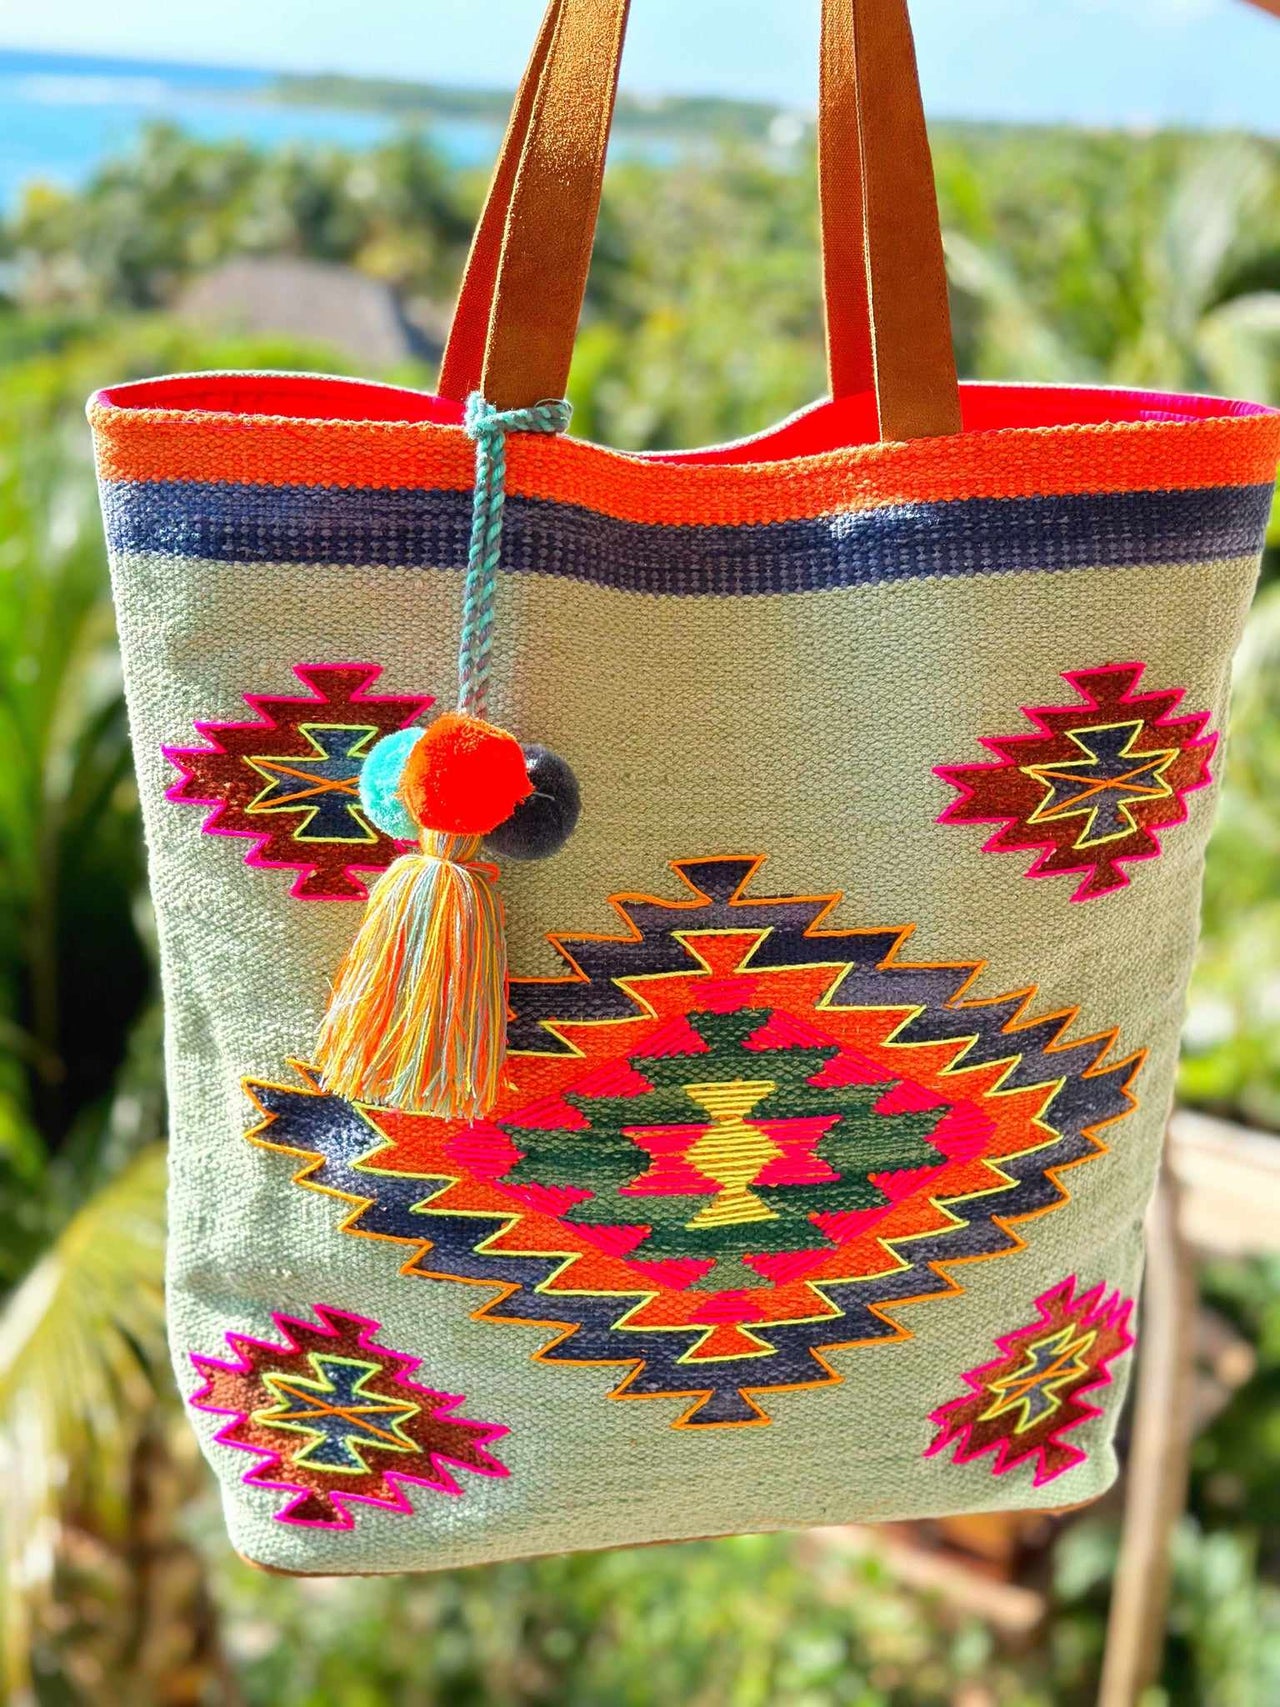 Western style canvas tote bag.